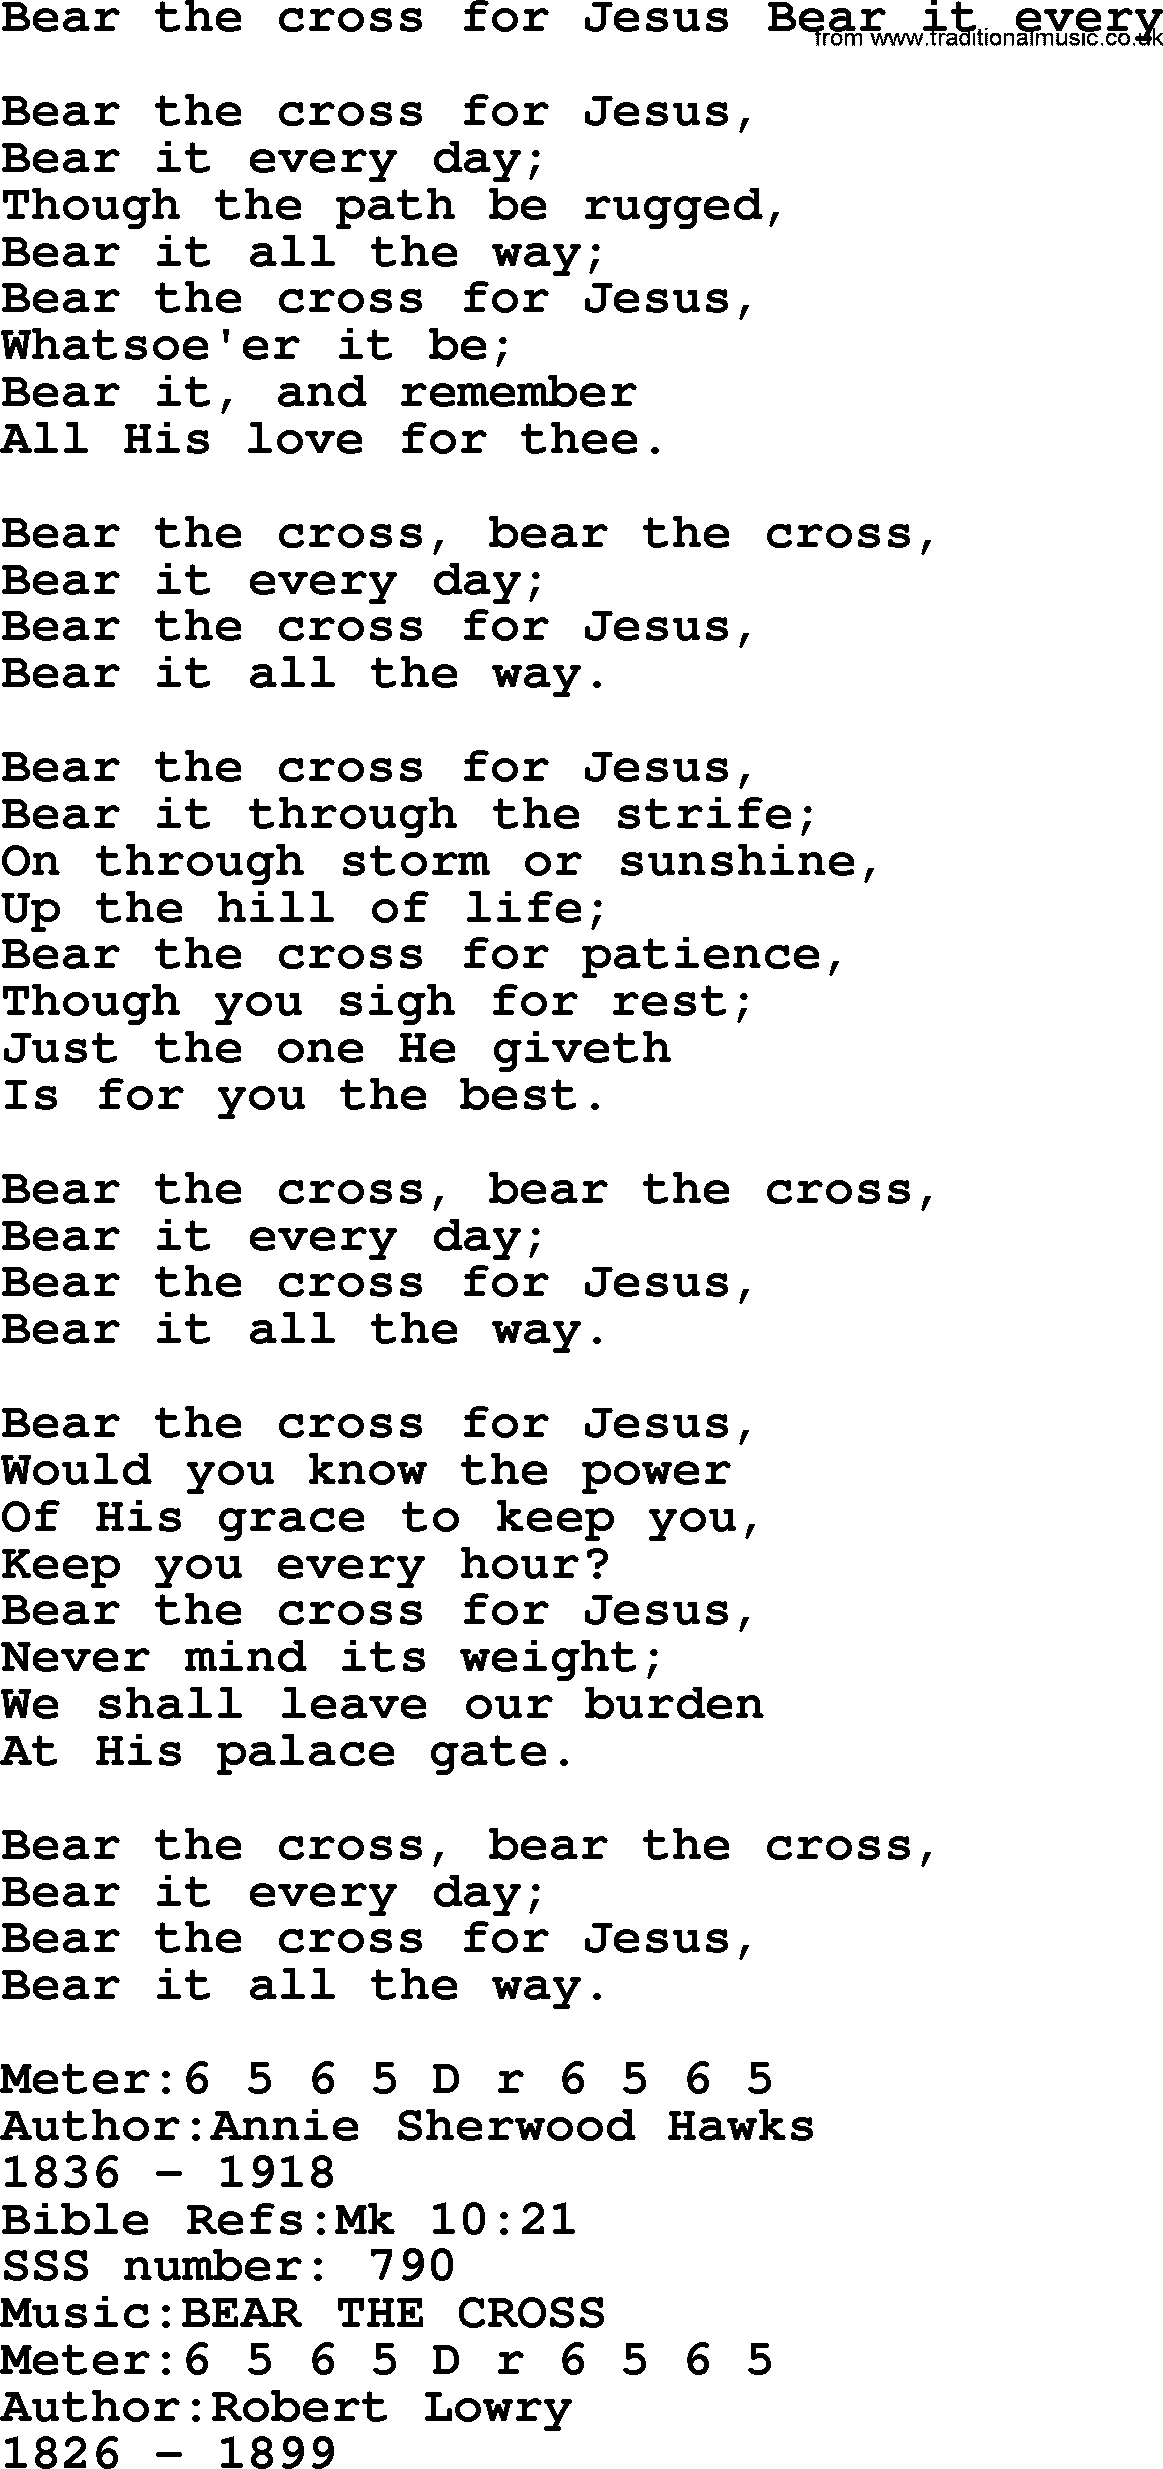 Sacred Songs and Solos complete, 1200 Hymns, title: Bear The Cross For Jesus Bear It Every, lyrics and PDF